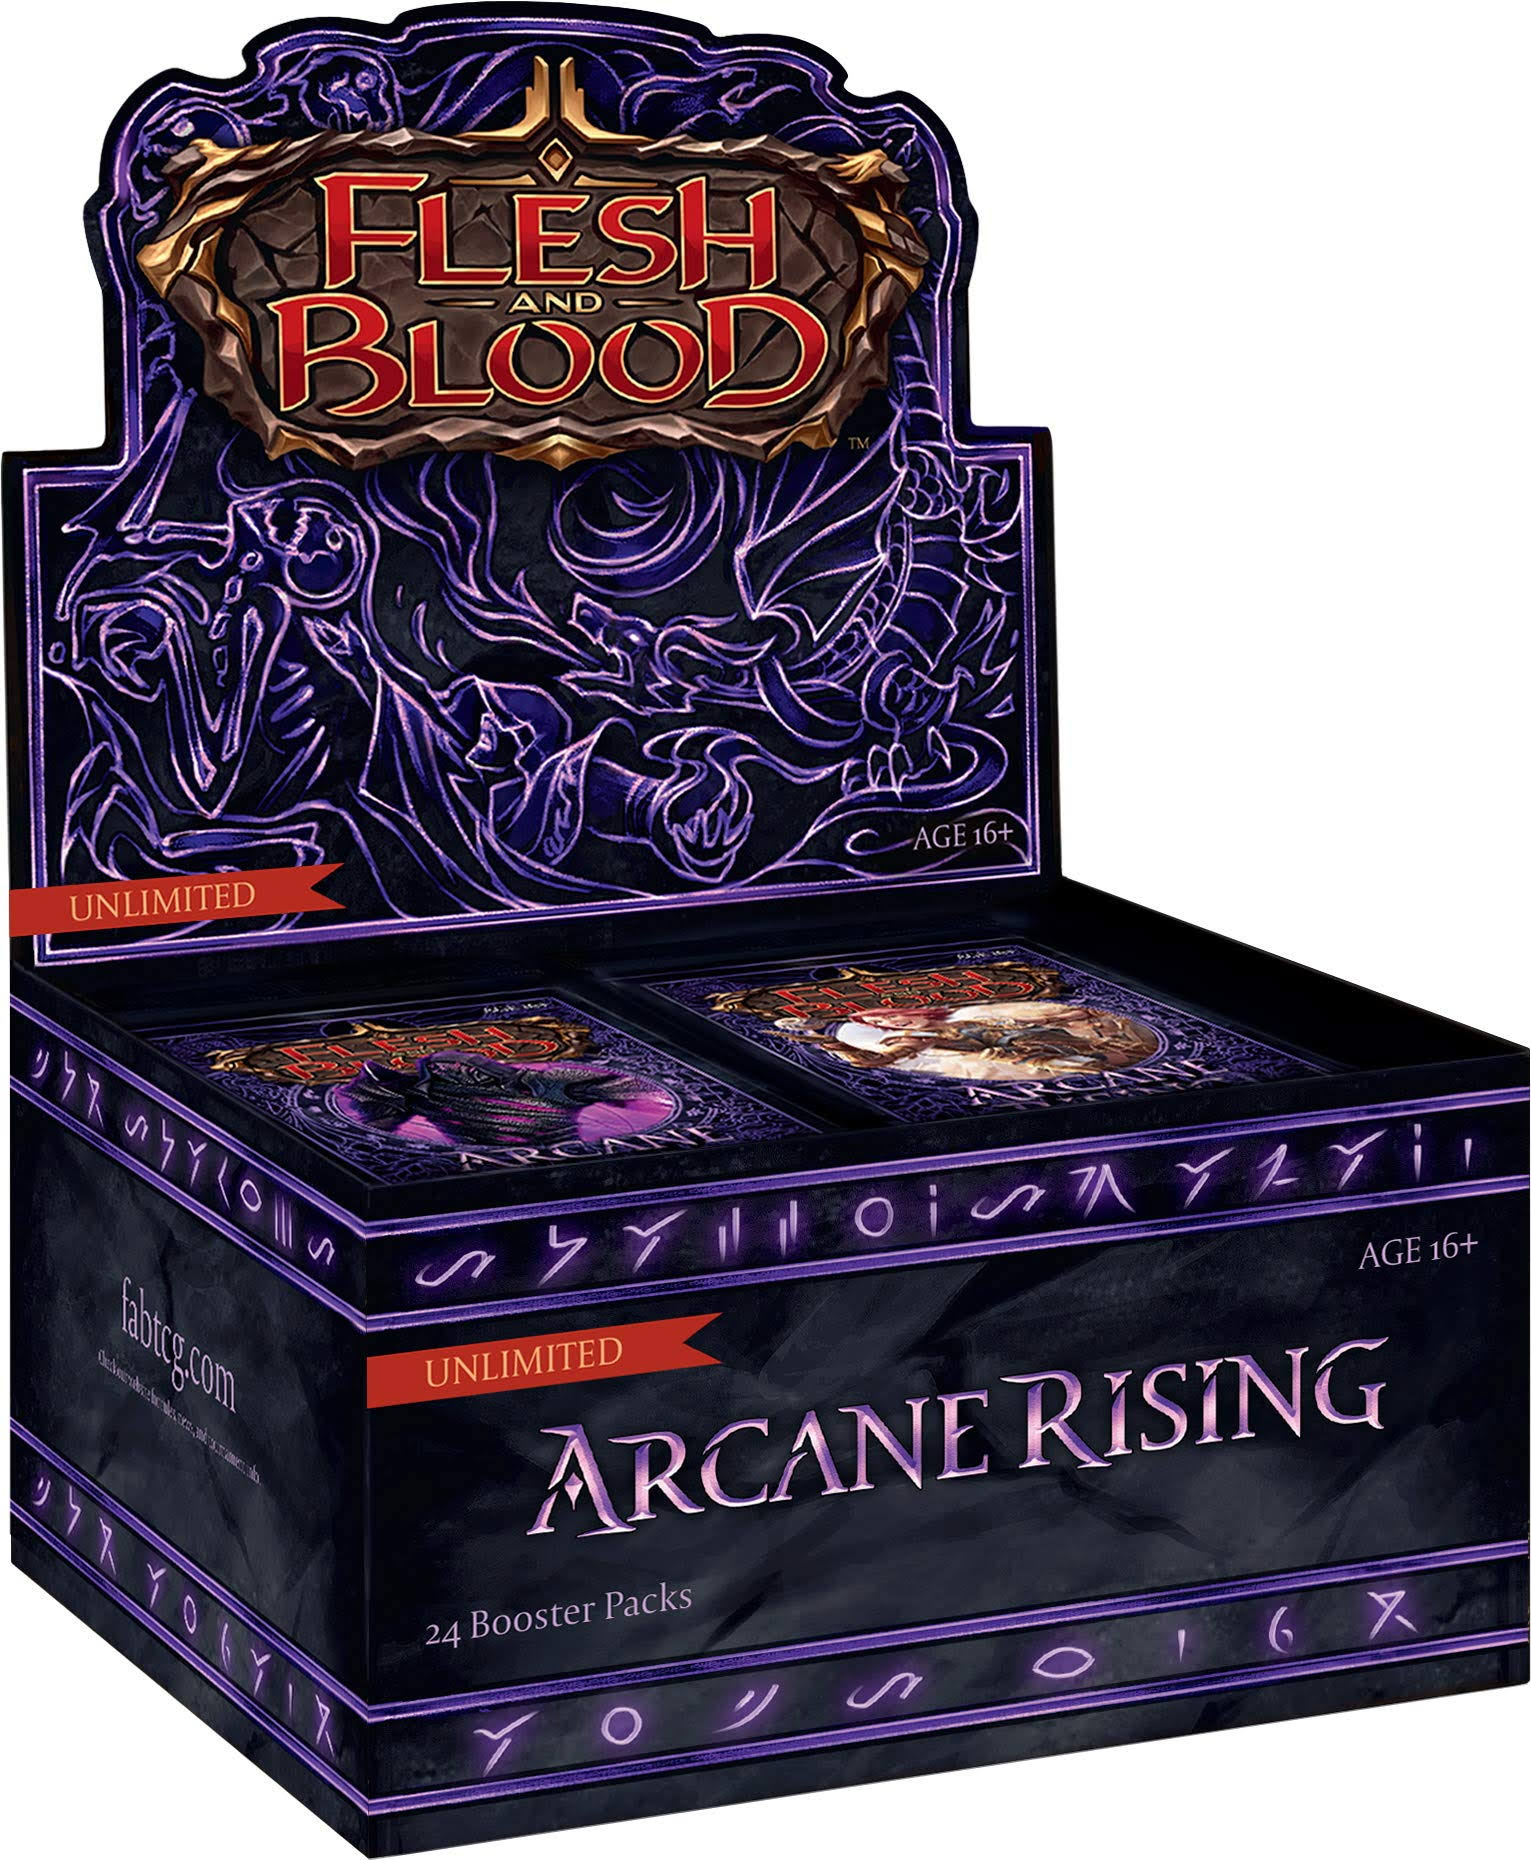 Flesh and Blood - Arcane Rising Unlimited - Booster Box